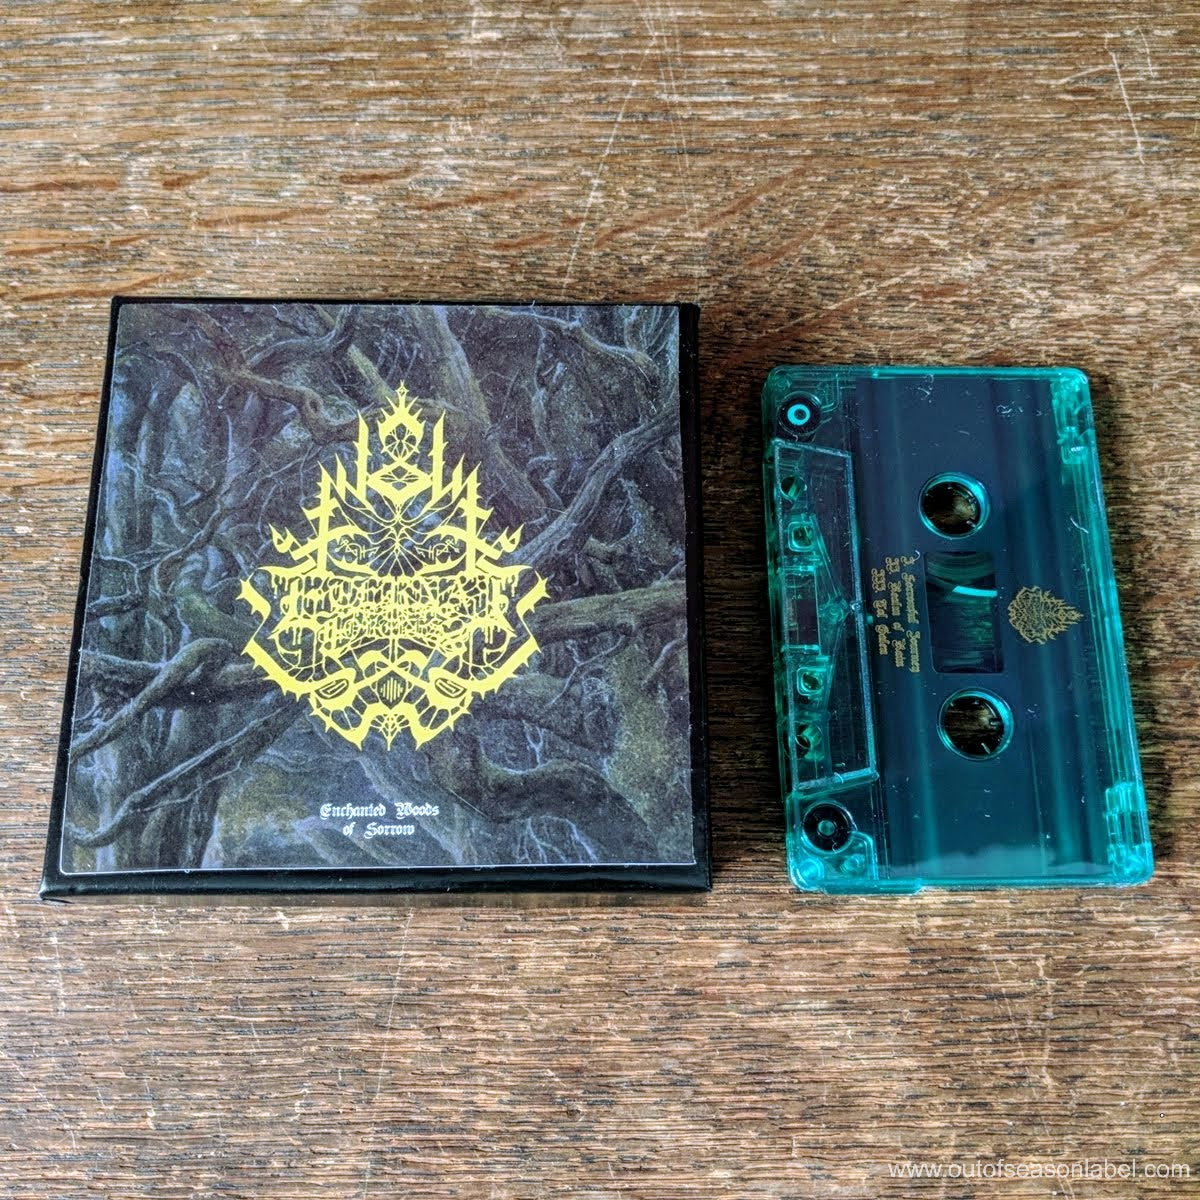 [SOLD OUT] ETERNAL FORTRESS "Enchanted Woods of Sorrow" Cassette Tape